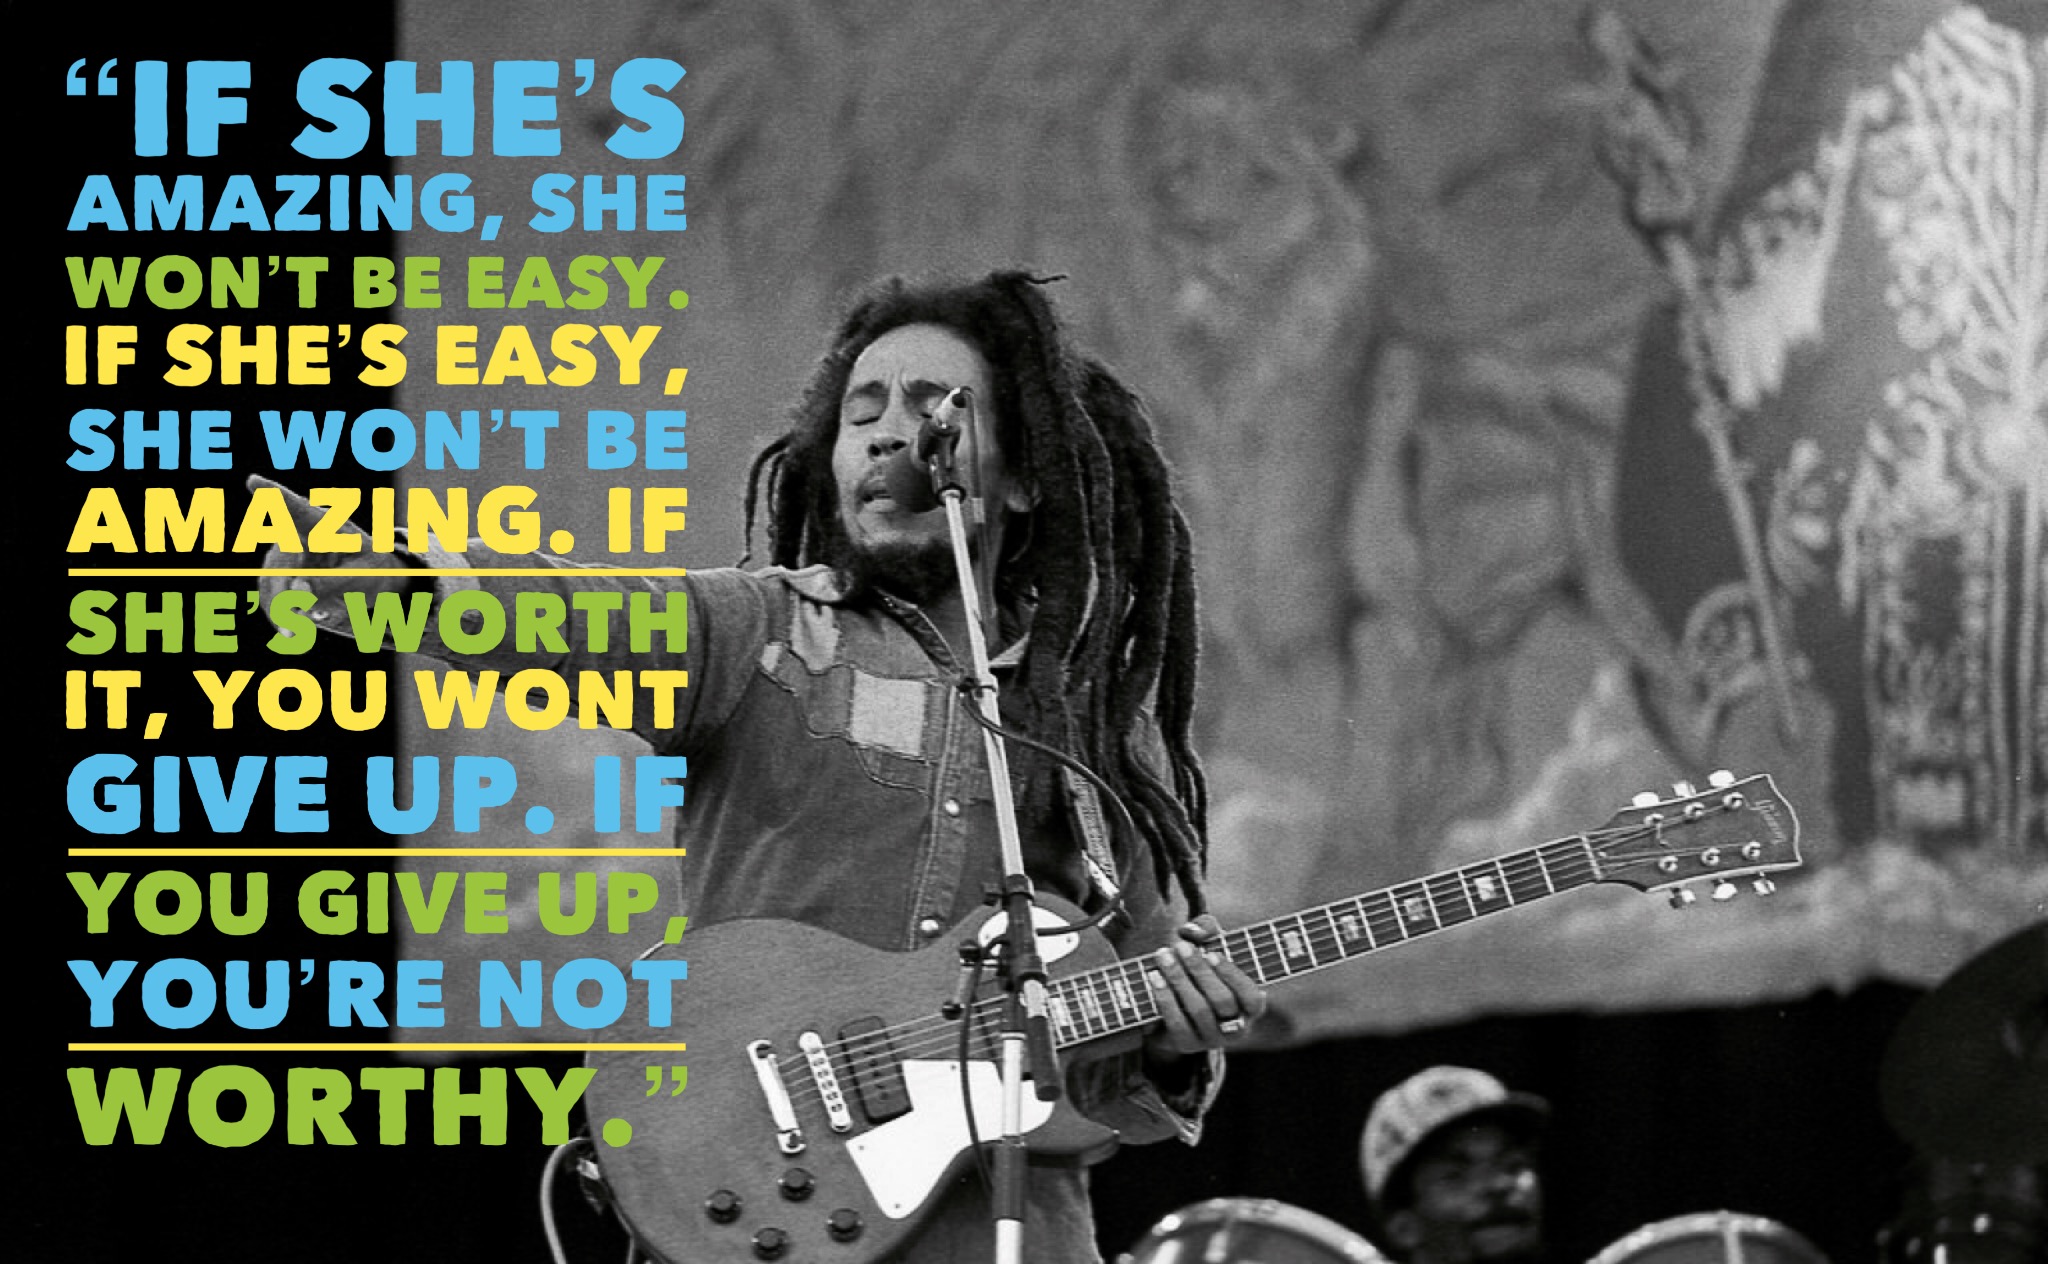 Bob Marley Quotes: 20 Powerful Sayings & Lyrics To Live By